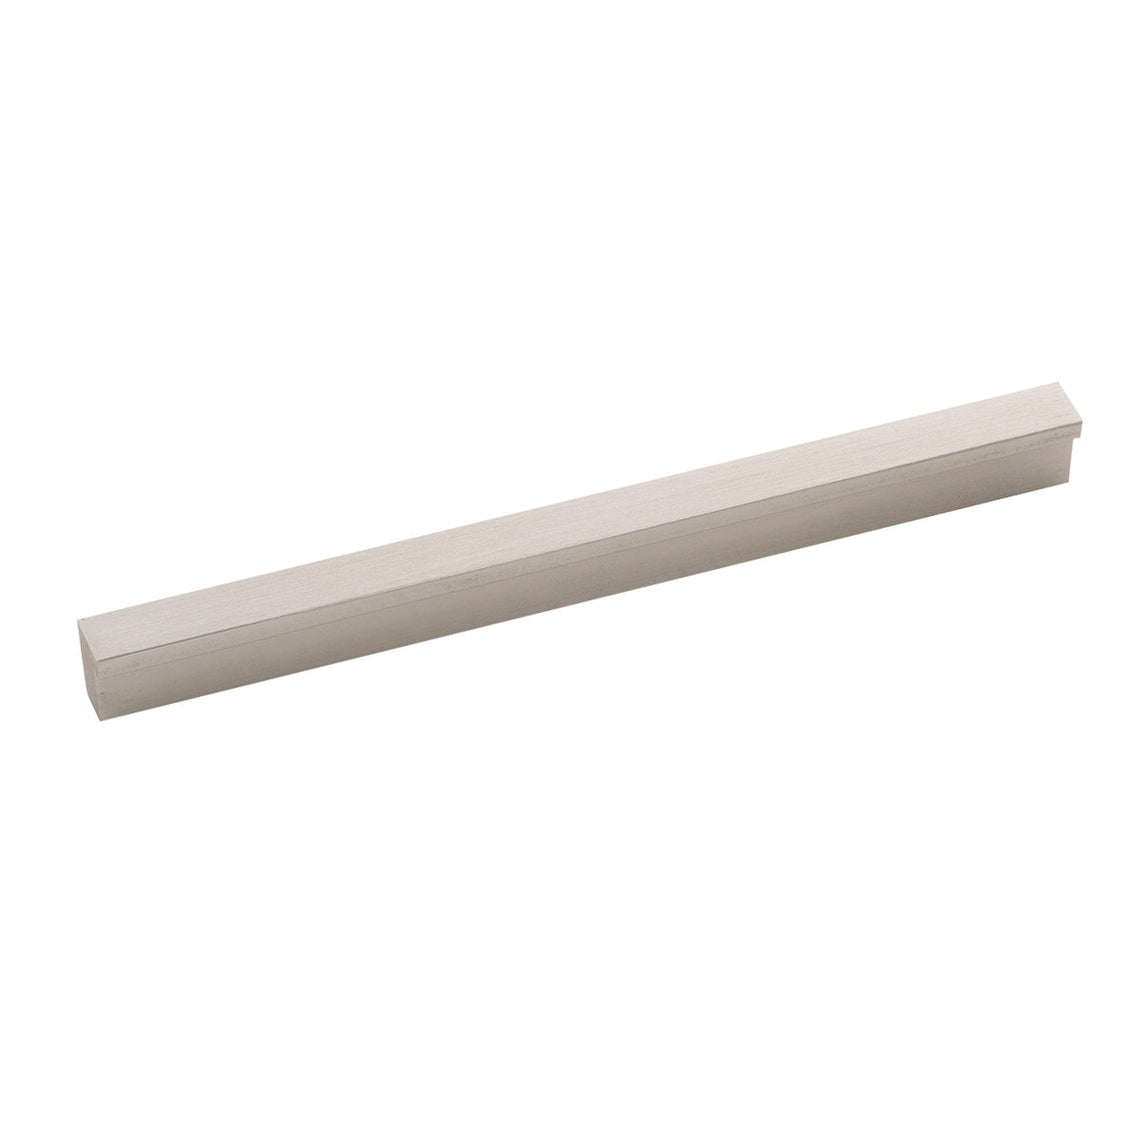 Cabinet Door Handles 6-5/16 Inch (160mm) Center to Center - Hickory Hardware